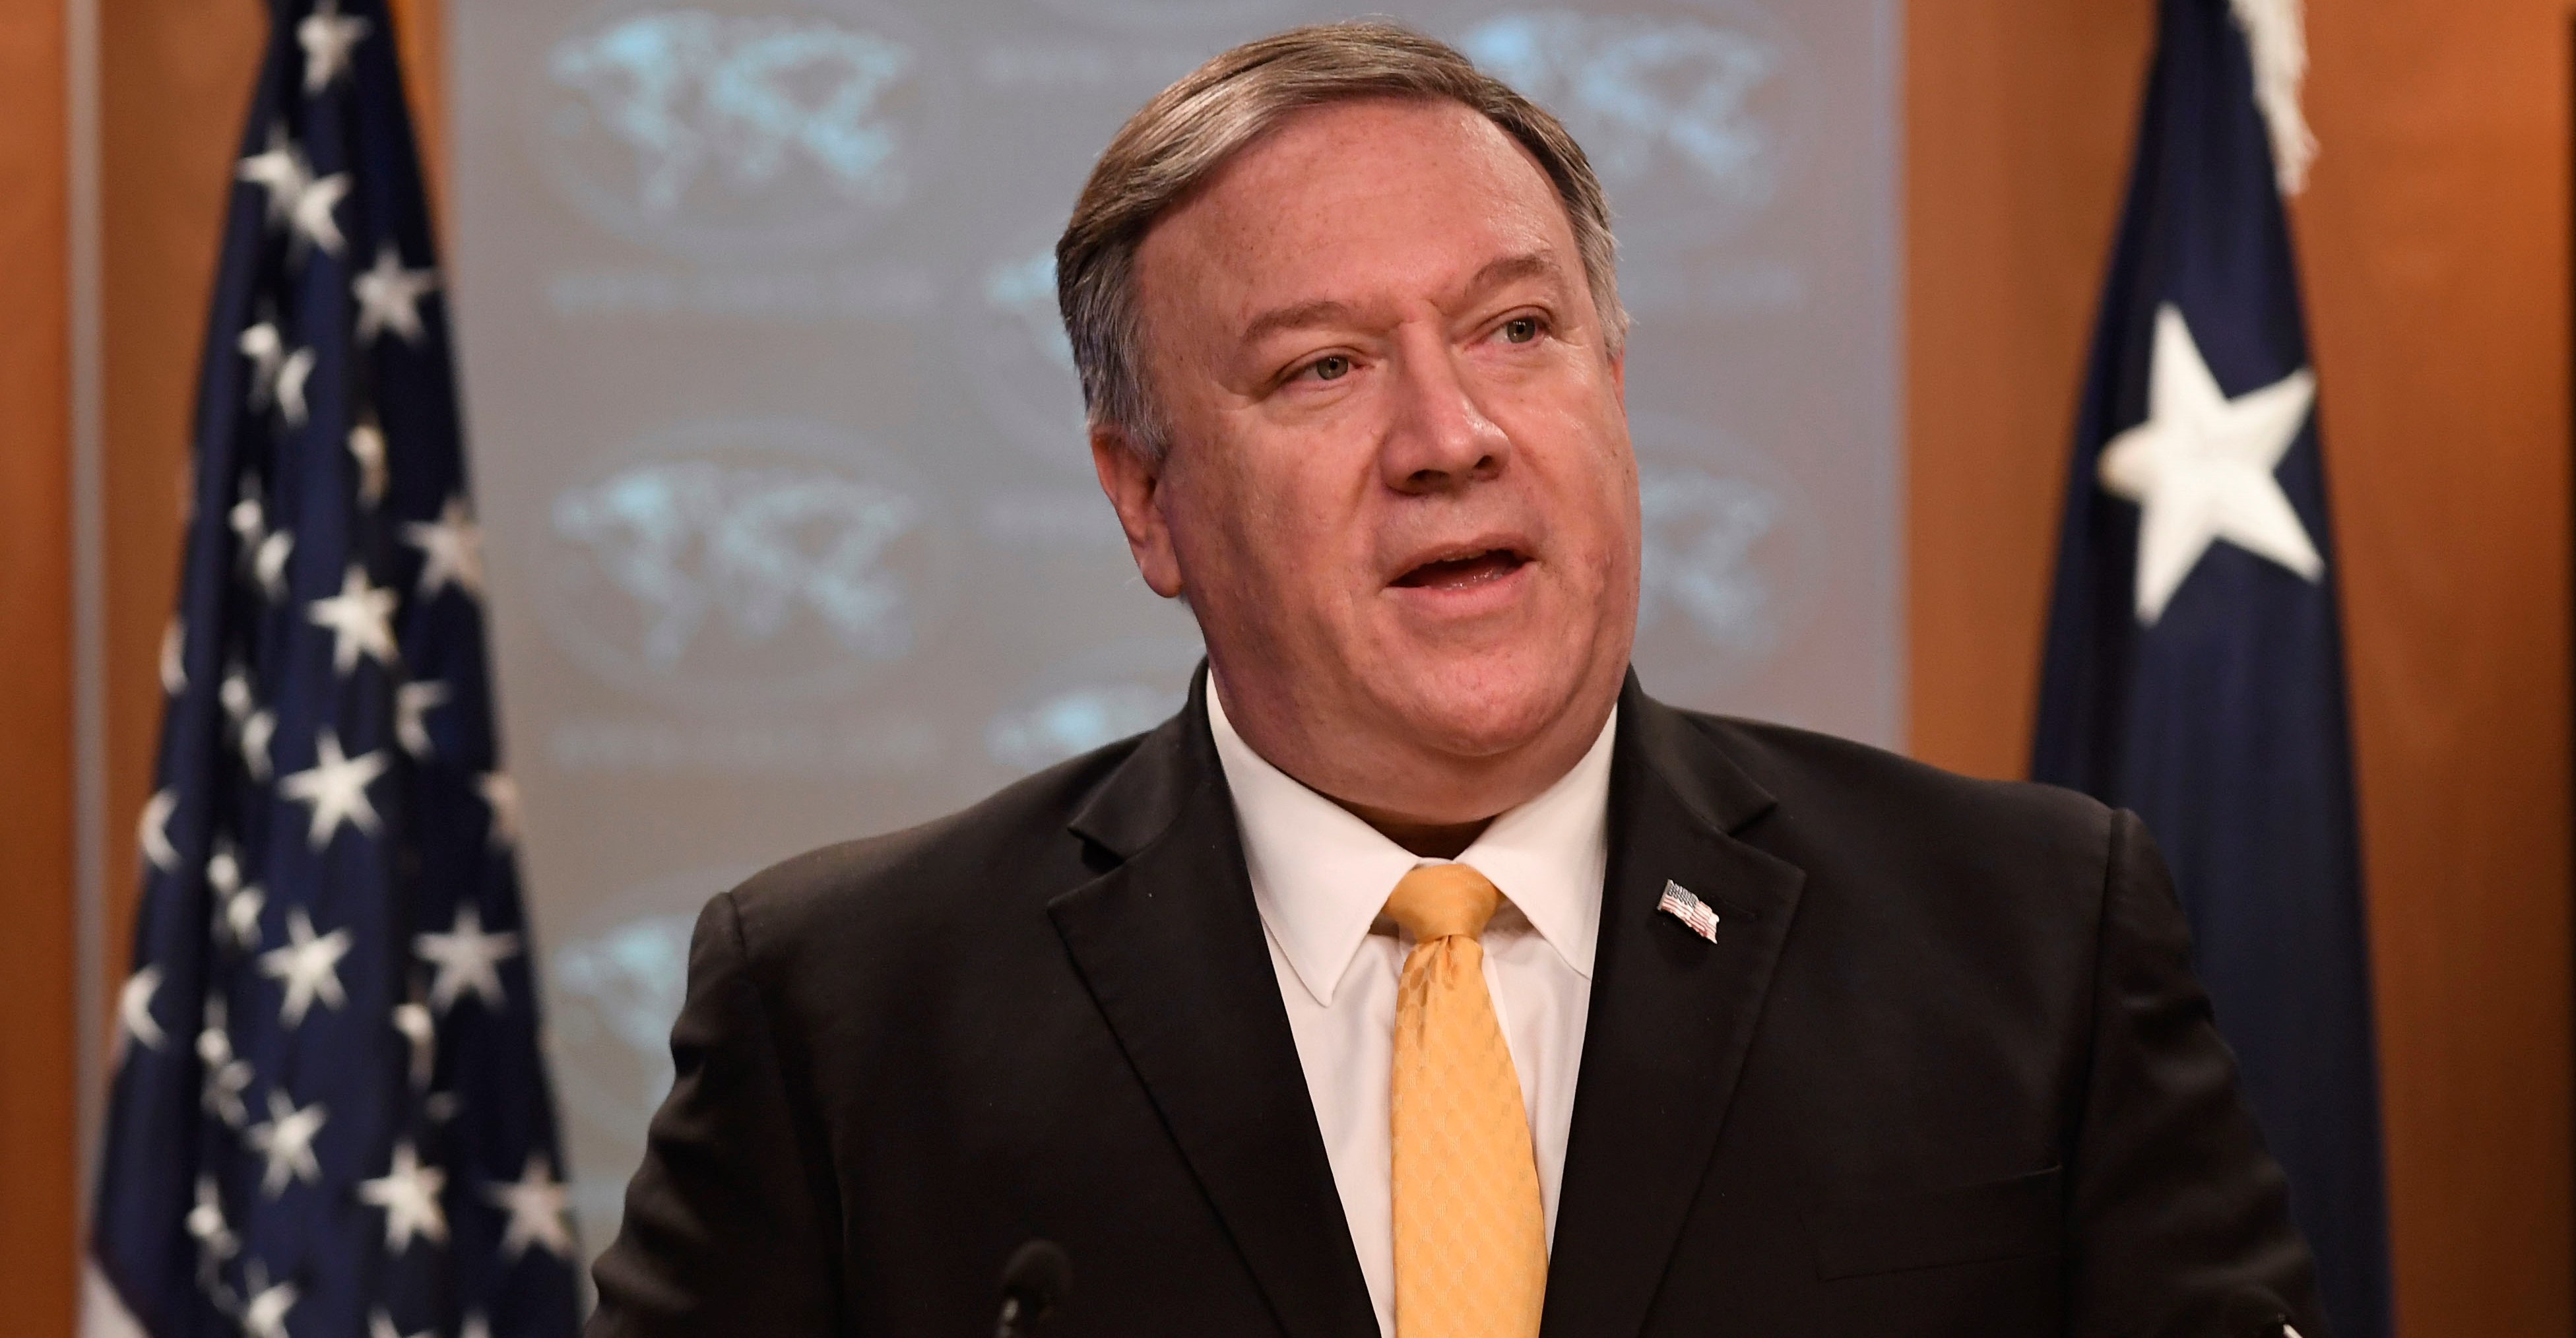 Threats from Iran have escalated, says Pompeo